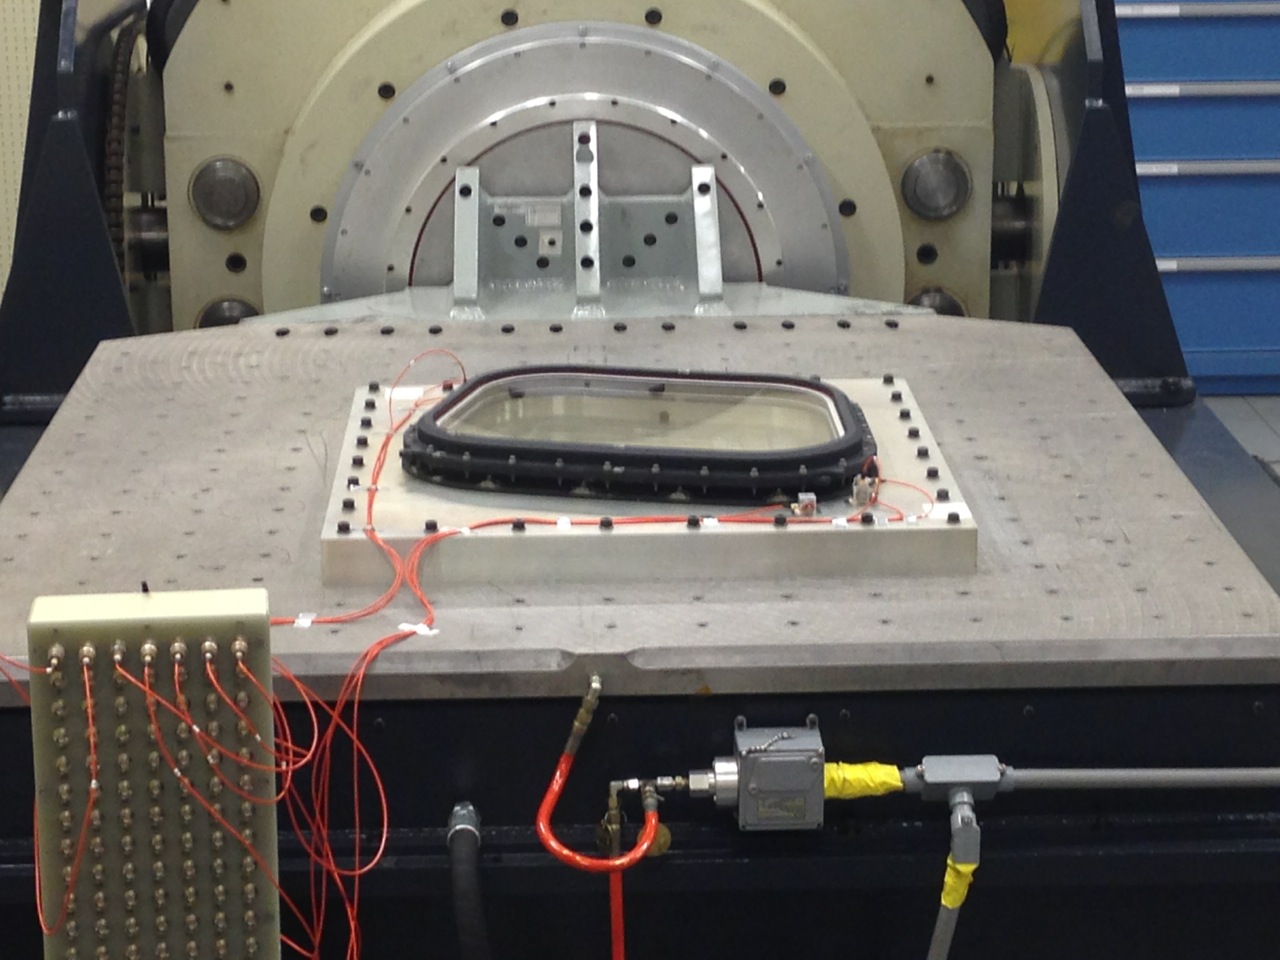 One of Orion’s windows is evaluated in a test fixture.